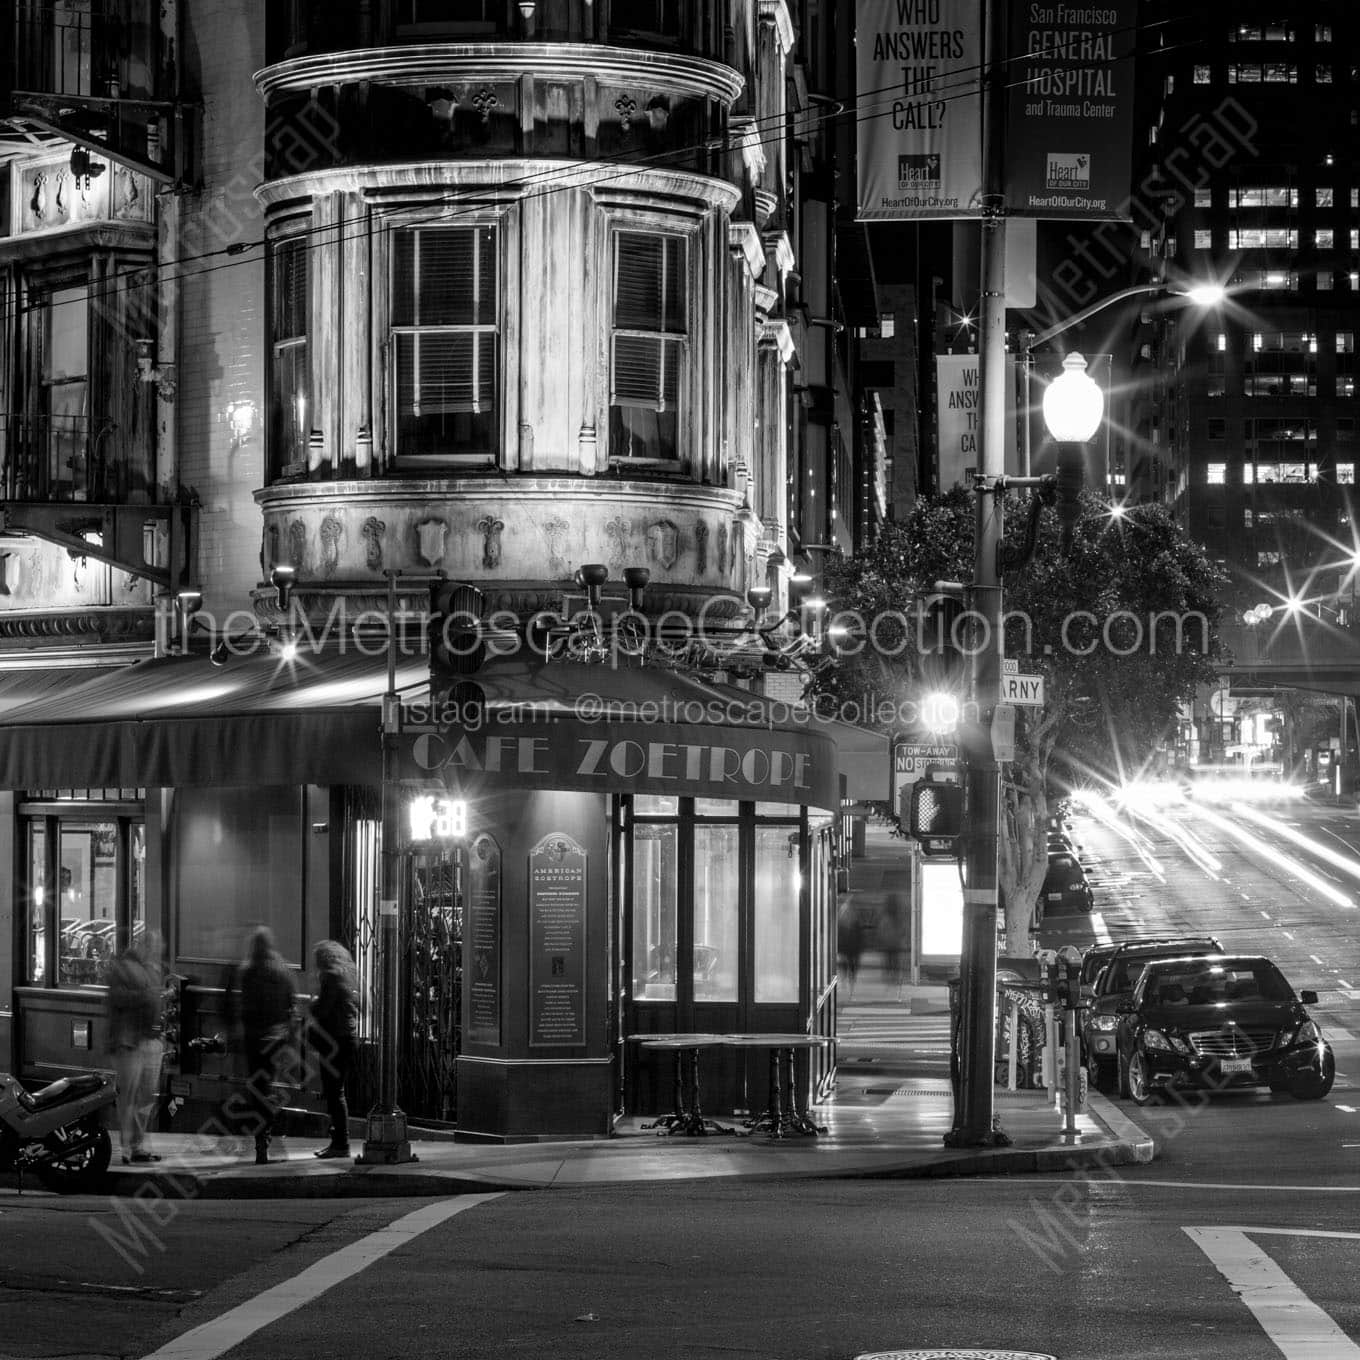 cafe zoetrope at night francis ford coppola Black & White Office Art